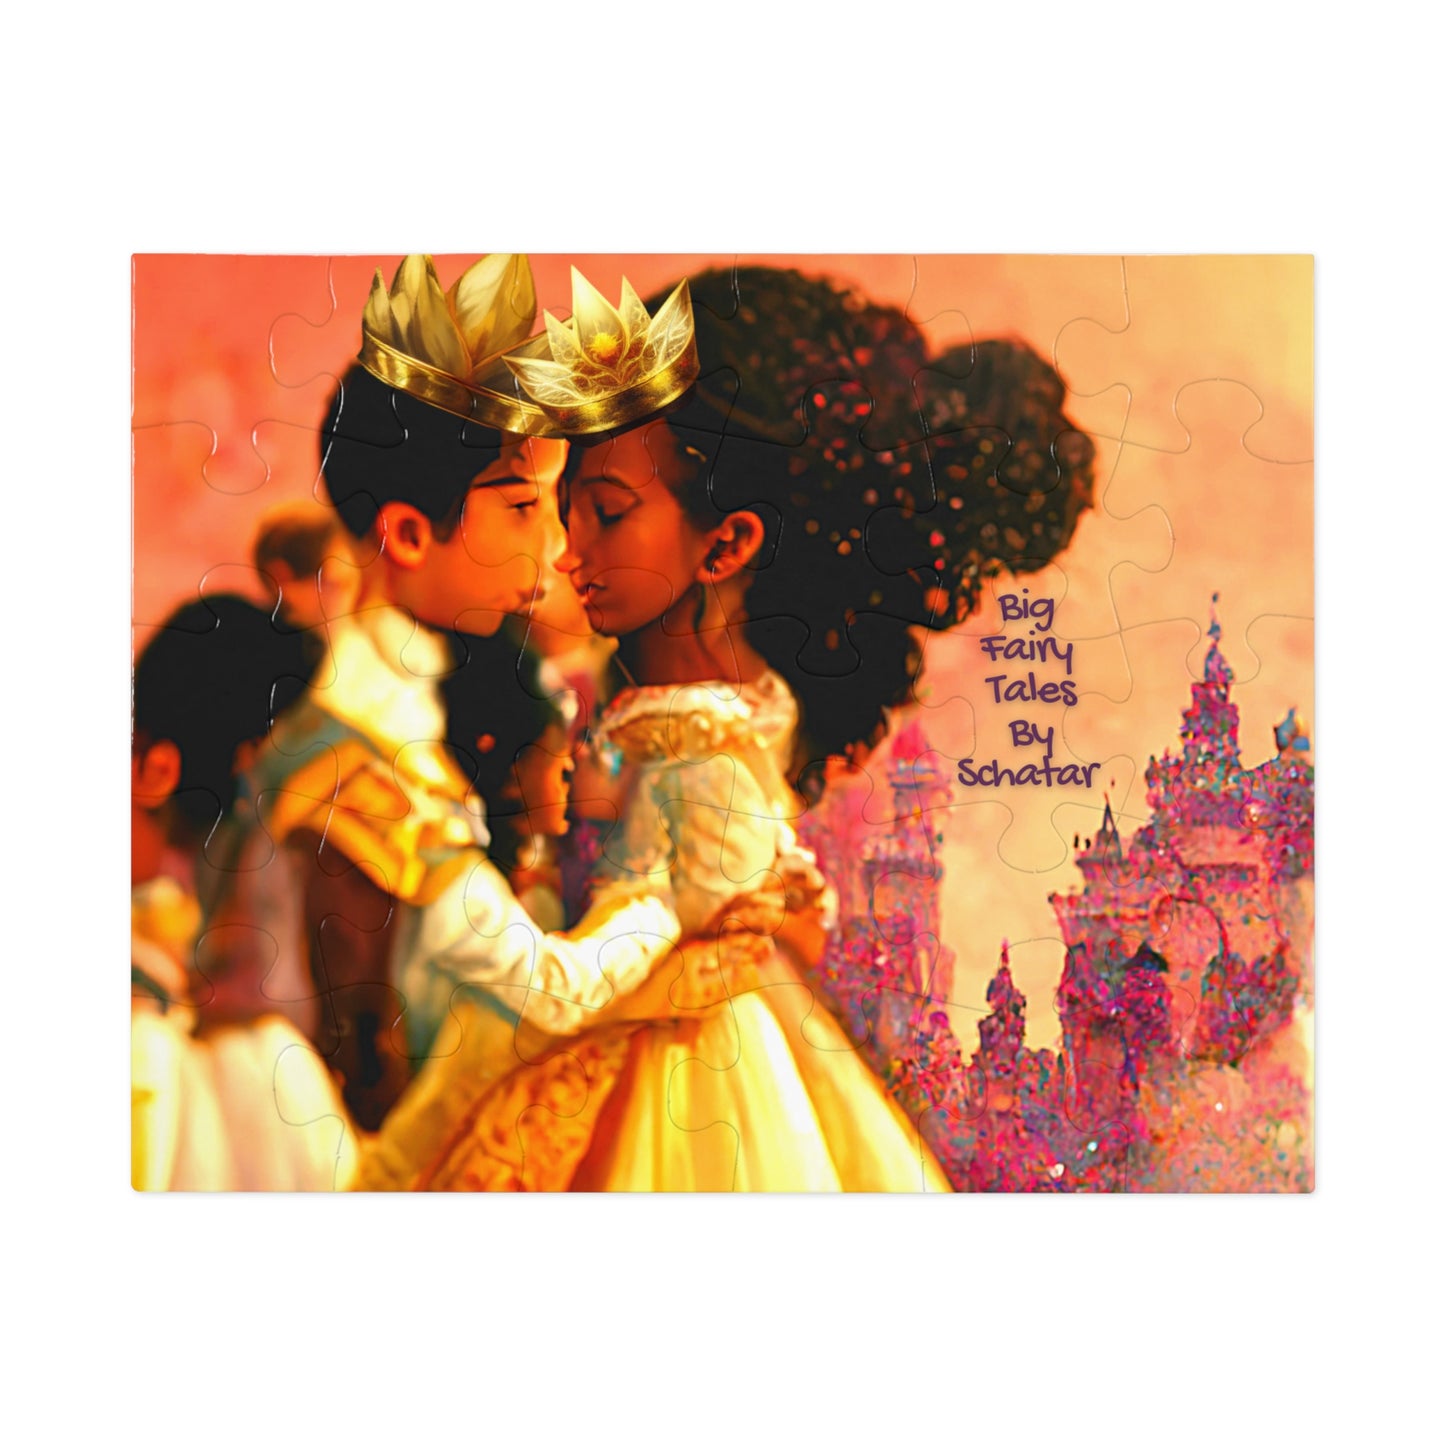 Big Fairy Tales By Schatar - Juliette's Romeo Jigsaw Puzzle